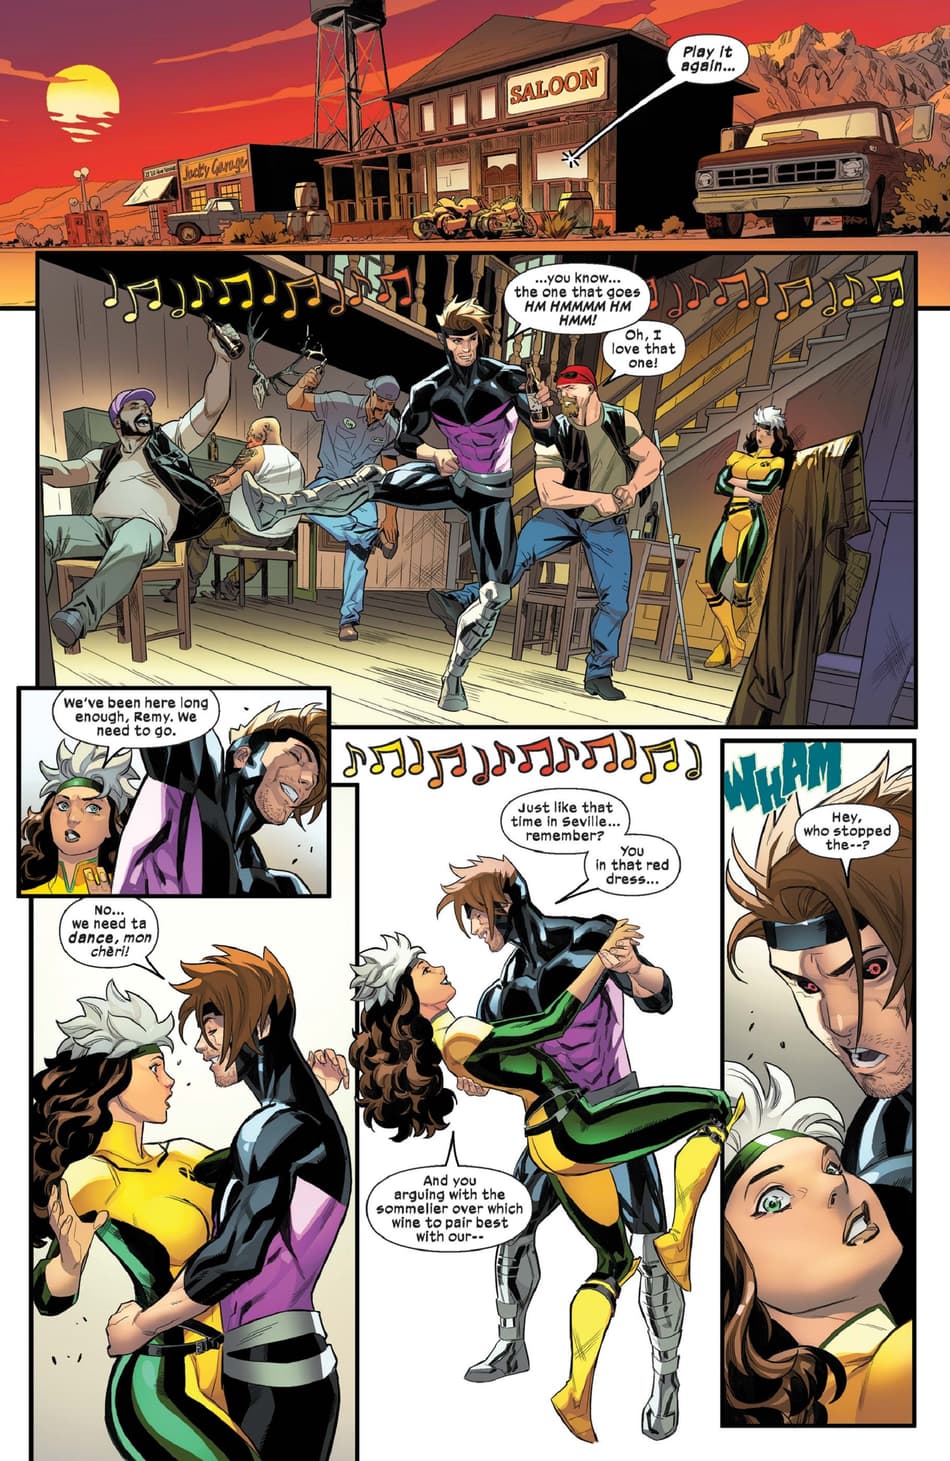 Preview page from ROGUE & GAMBIT (2023) #2 by Stephanie Phillips, Carlos Gómez, and David Curiel.